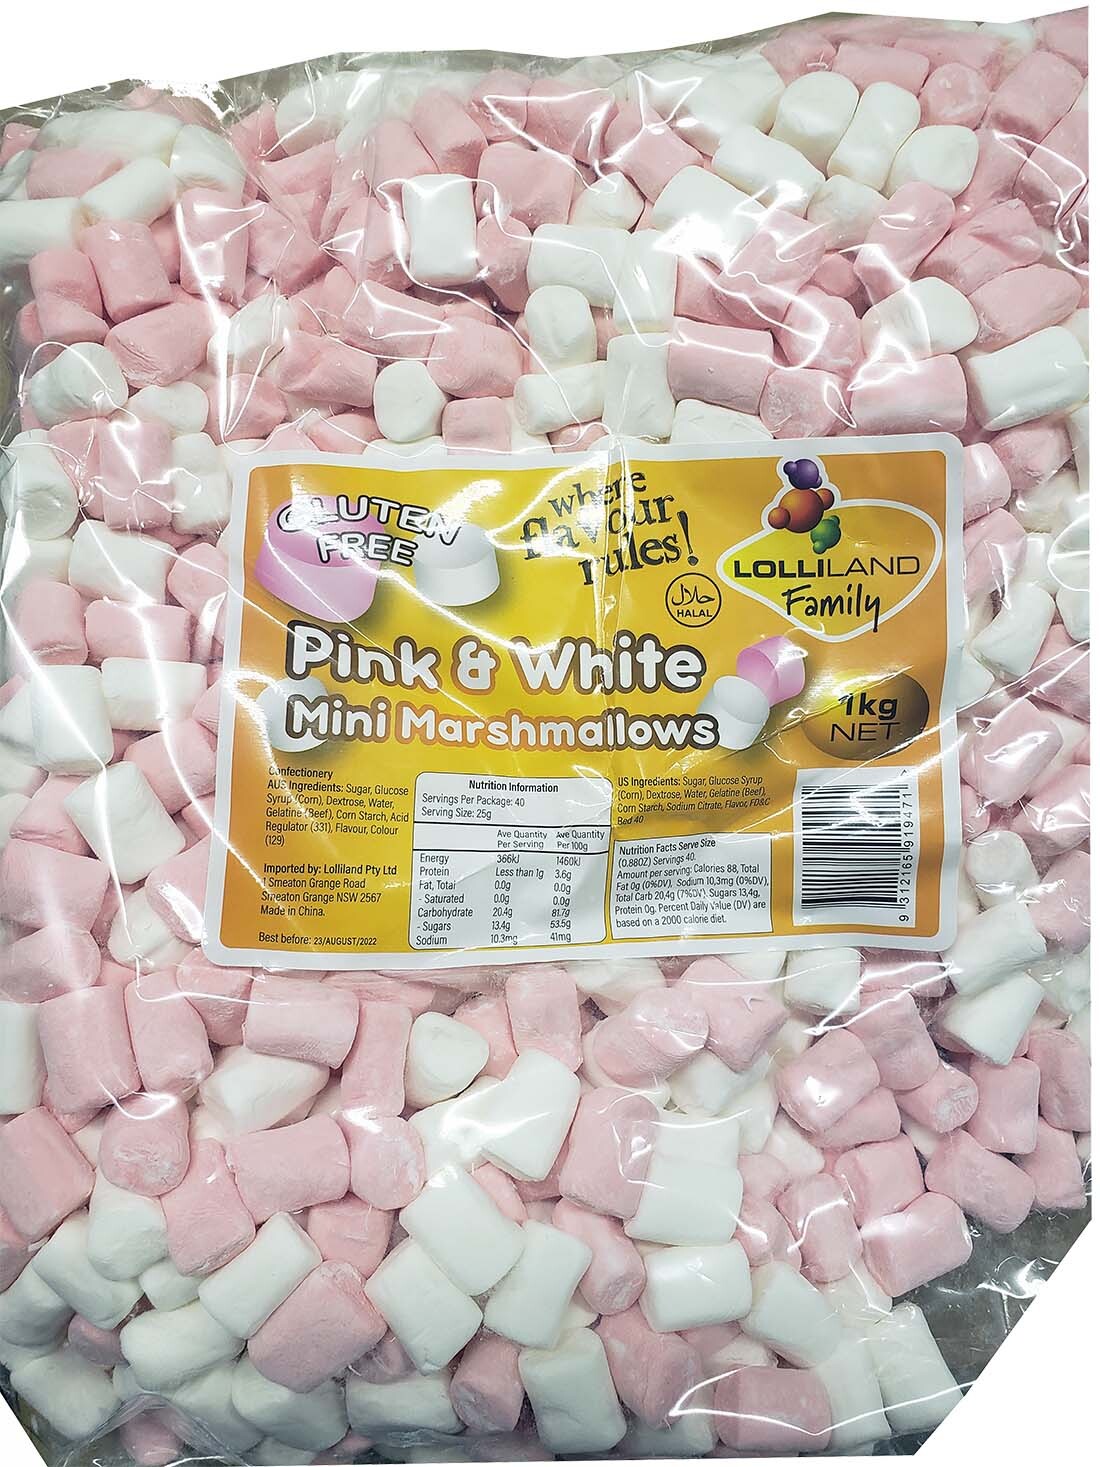 Halal Marshmallows - Learn What Makes Them Different